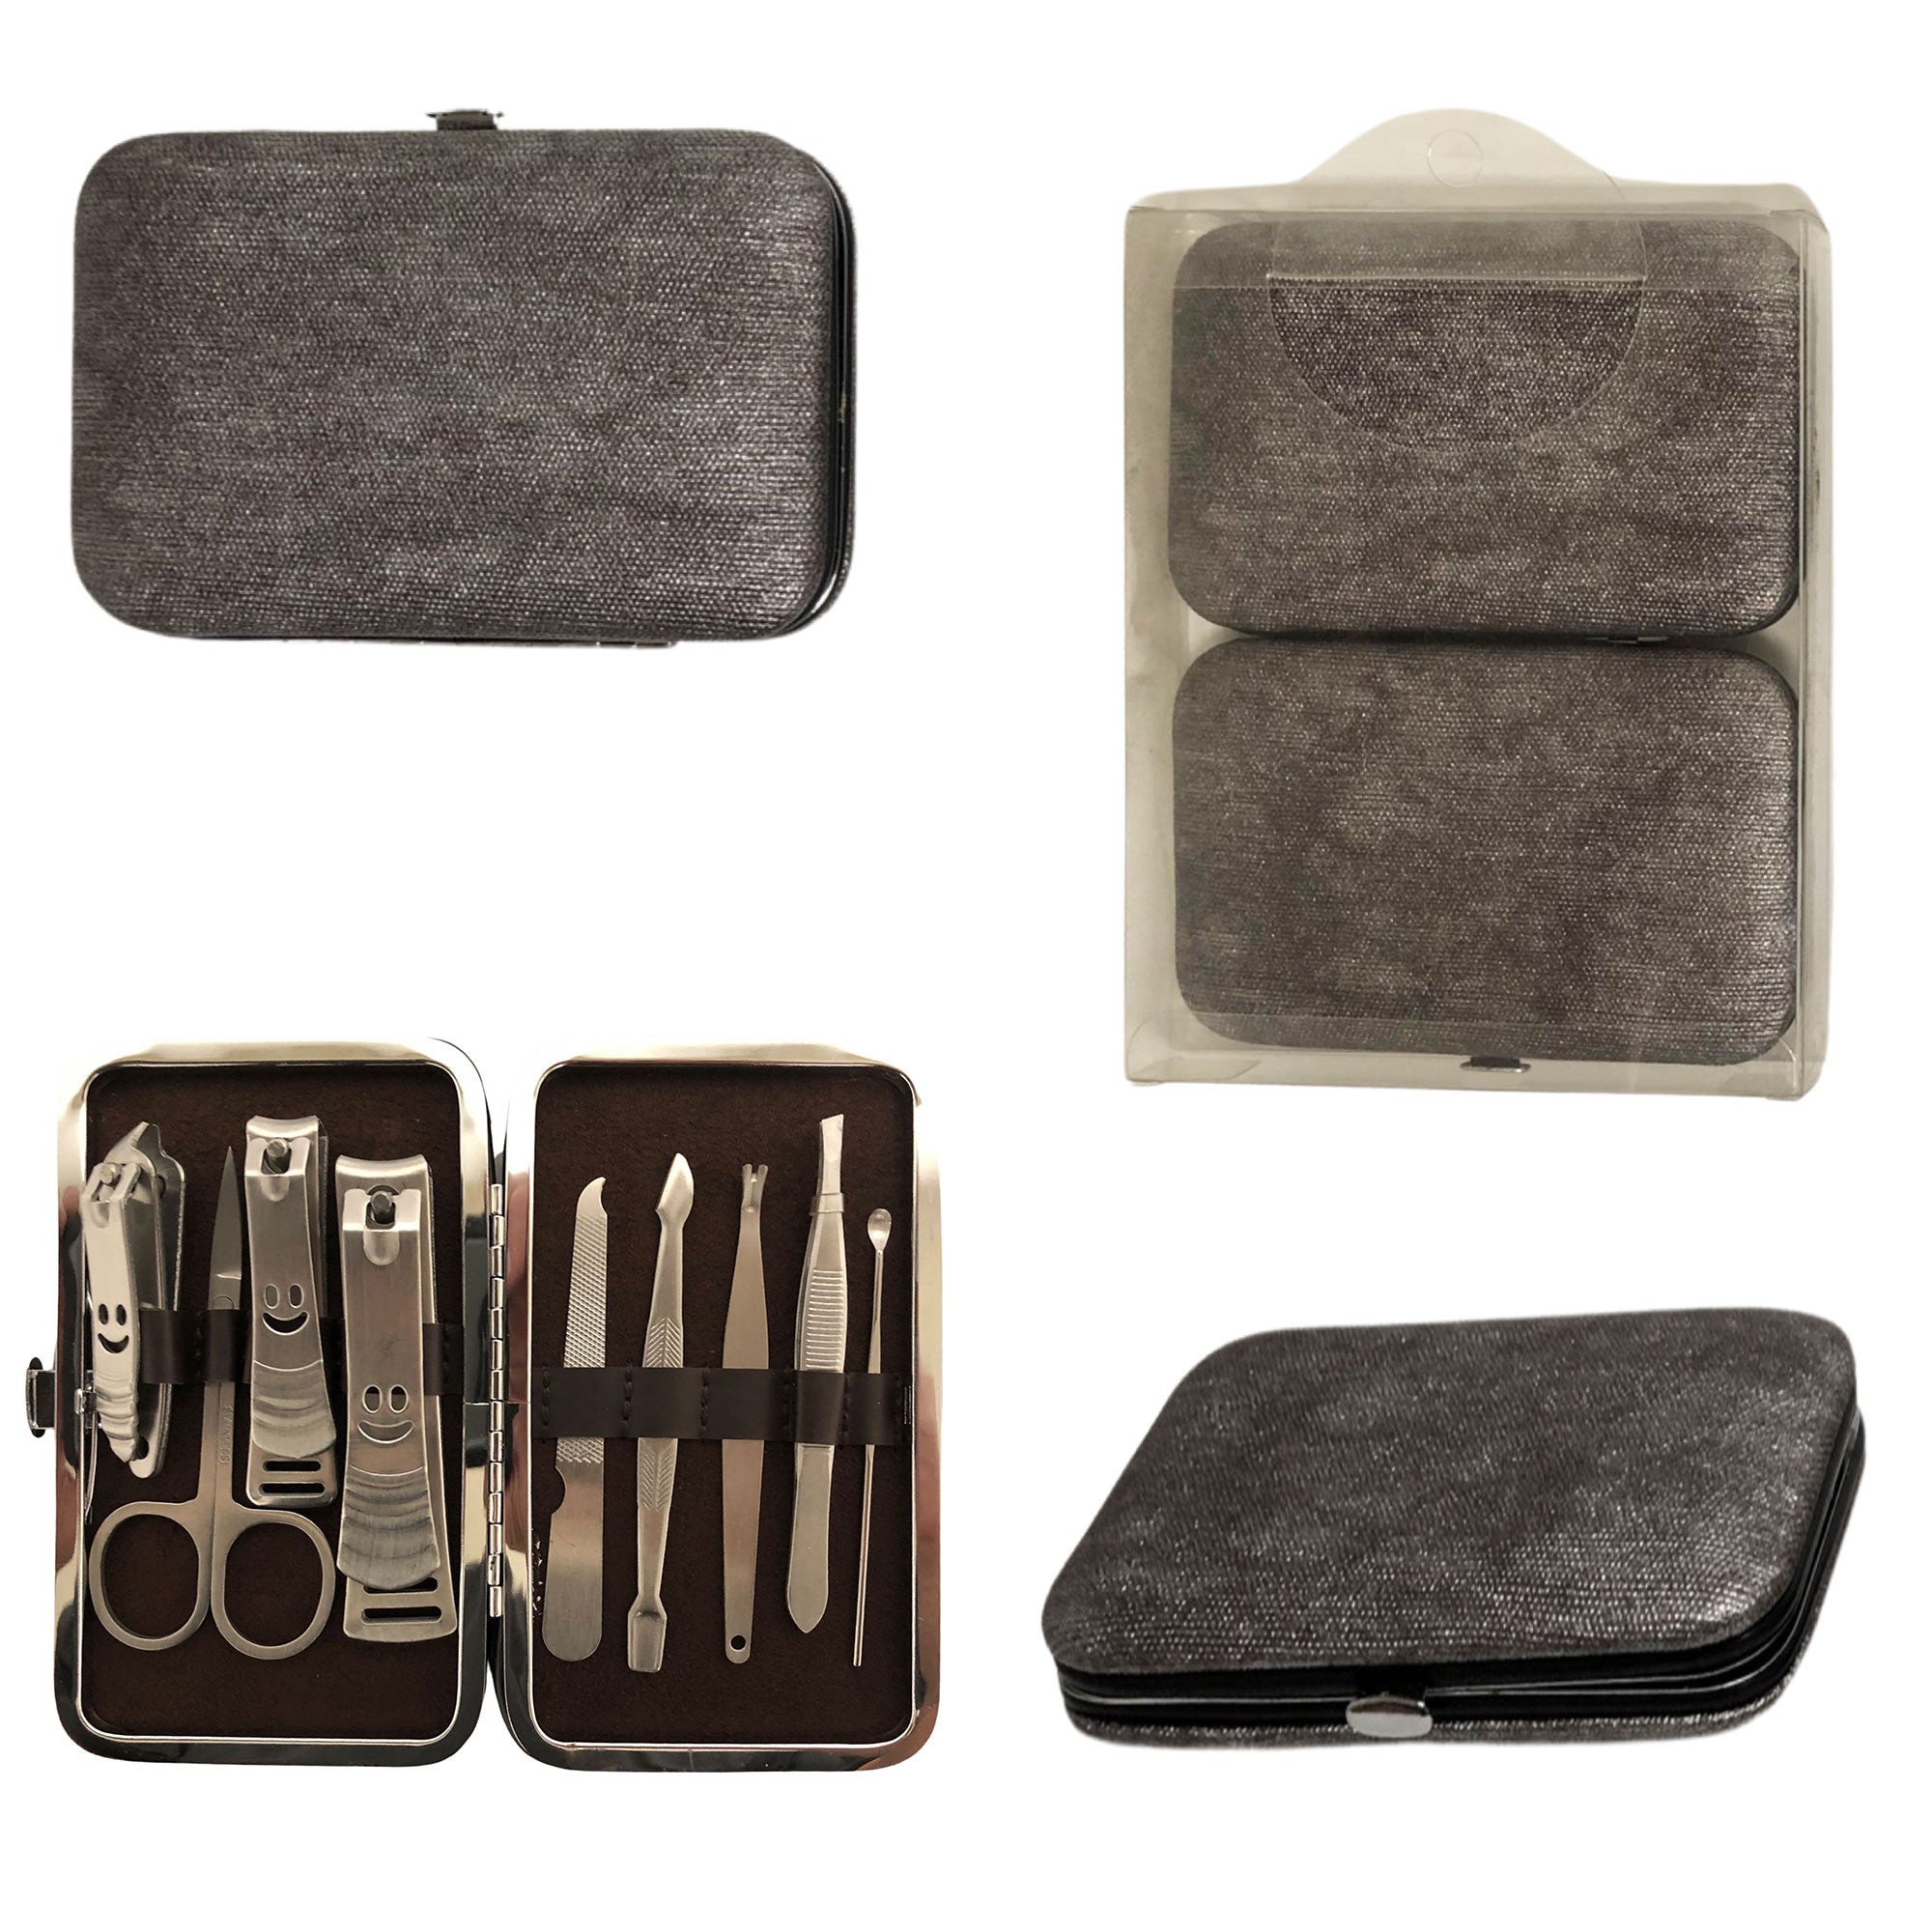 CLEARANCE MANICURE SET IN GREY CASE (CASE OF 24 - $2.50 / PIECE)  Wholesale 9 Piece Stainless Steel Manicure Set in Grey SKU: 9699-9019-SMT-GREY-24